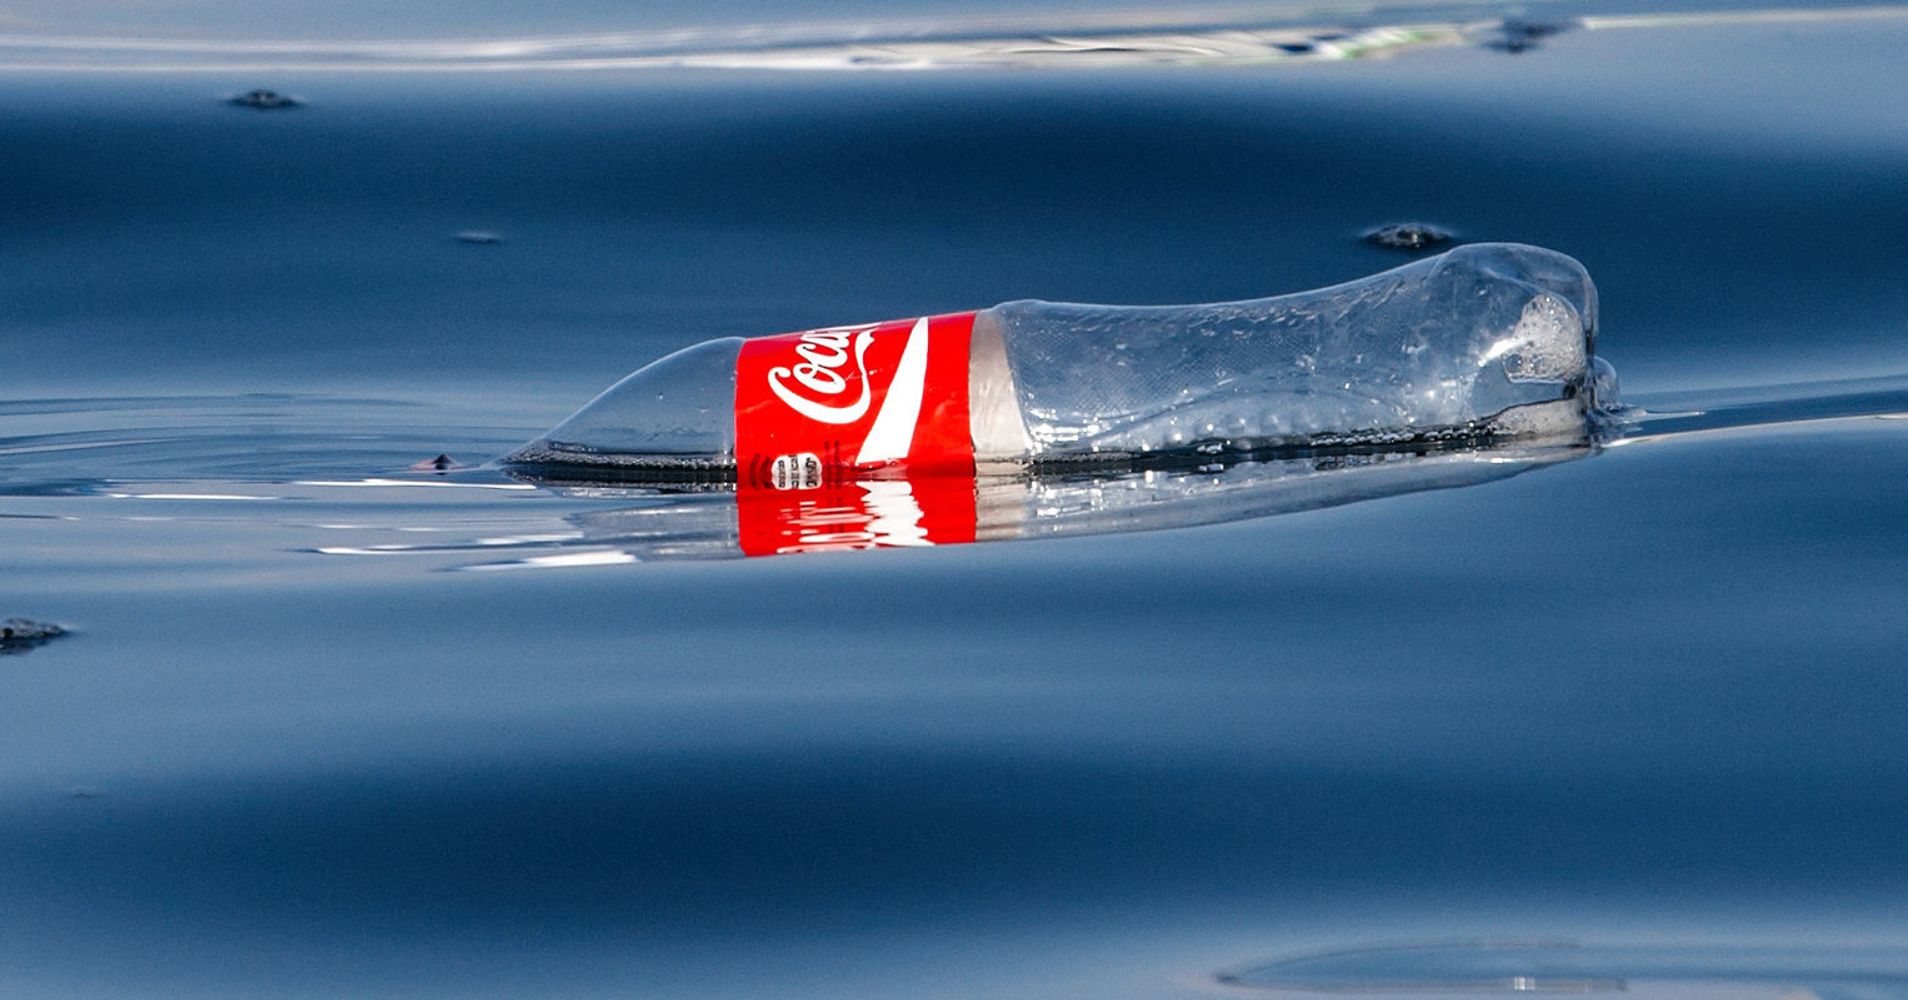 Coke Hopes No One Notices All The Plastic Bottles Floating In The Ocean